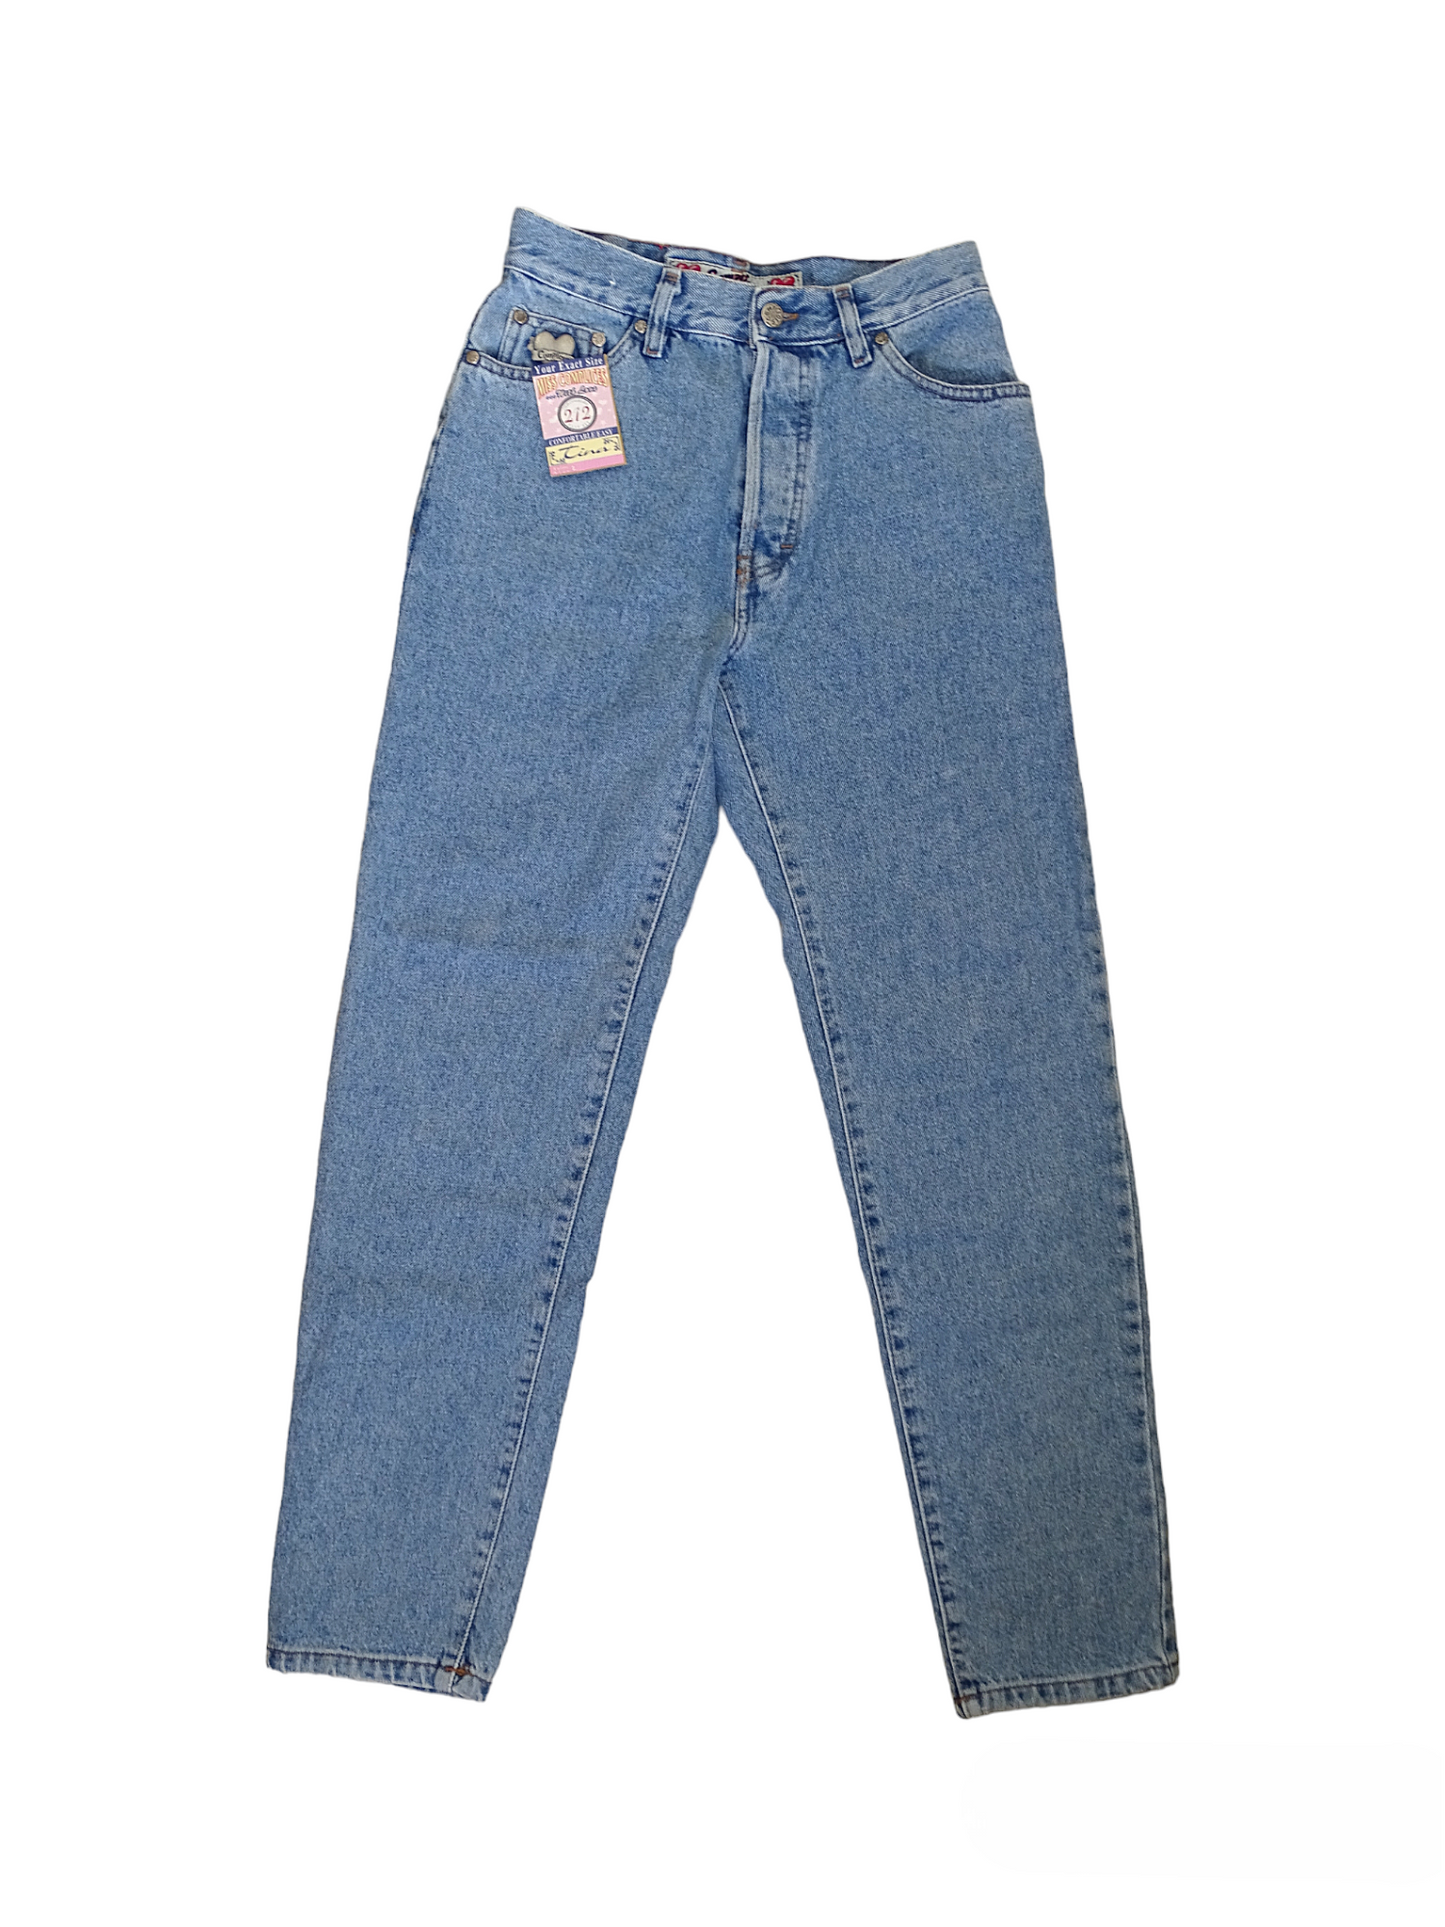 JEAN COMPLICES VINTAGE NEUF